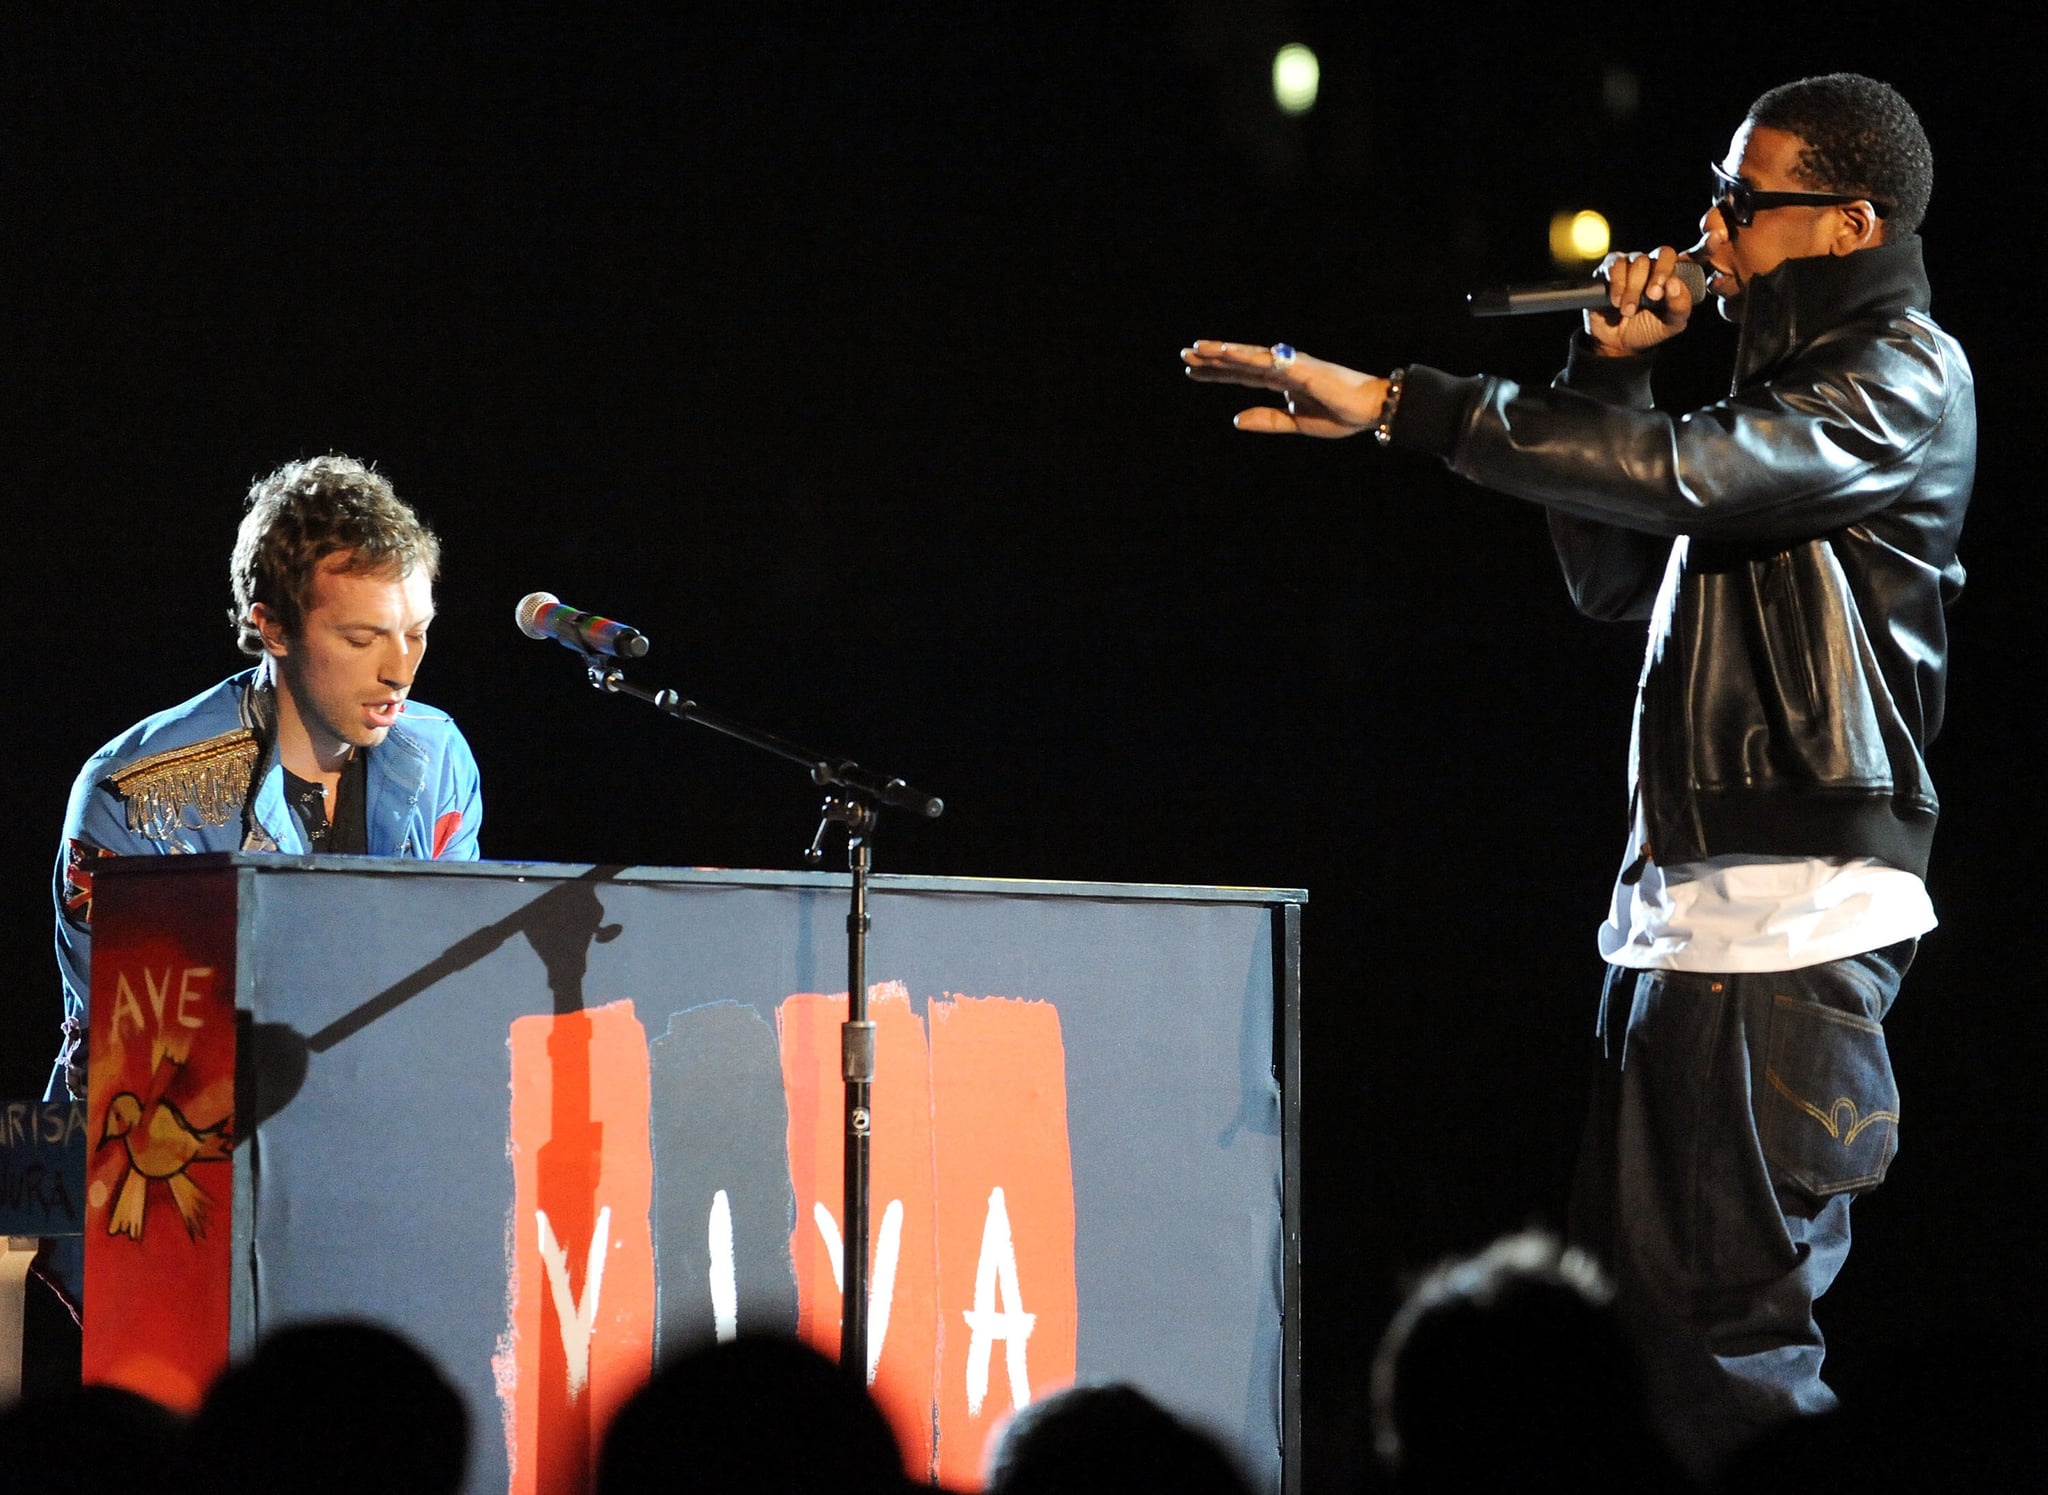 Jay Z joined Coldplay on stage in 2009.